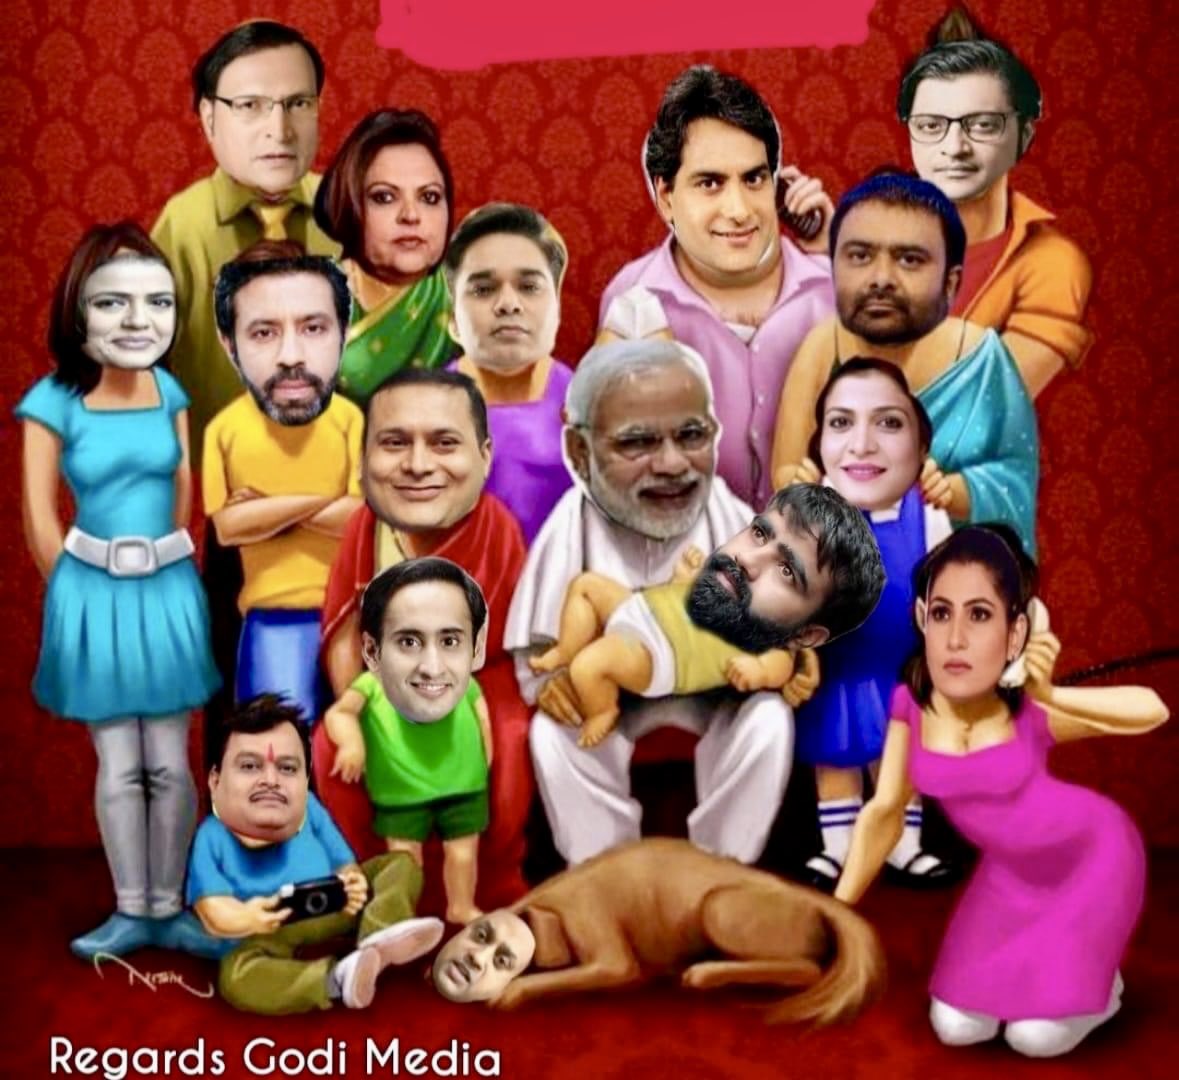 @SpiritOfCongres When modi is voted out, these should be held accountable for aiding and abetting the man who murdered democracy! #GodiMedia